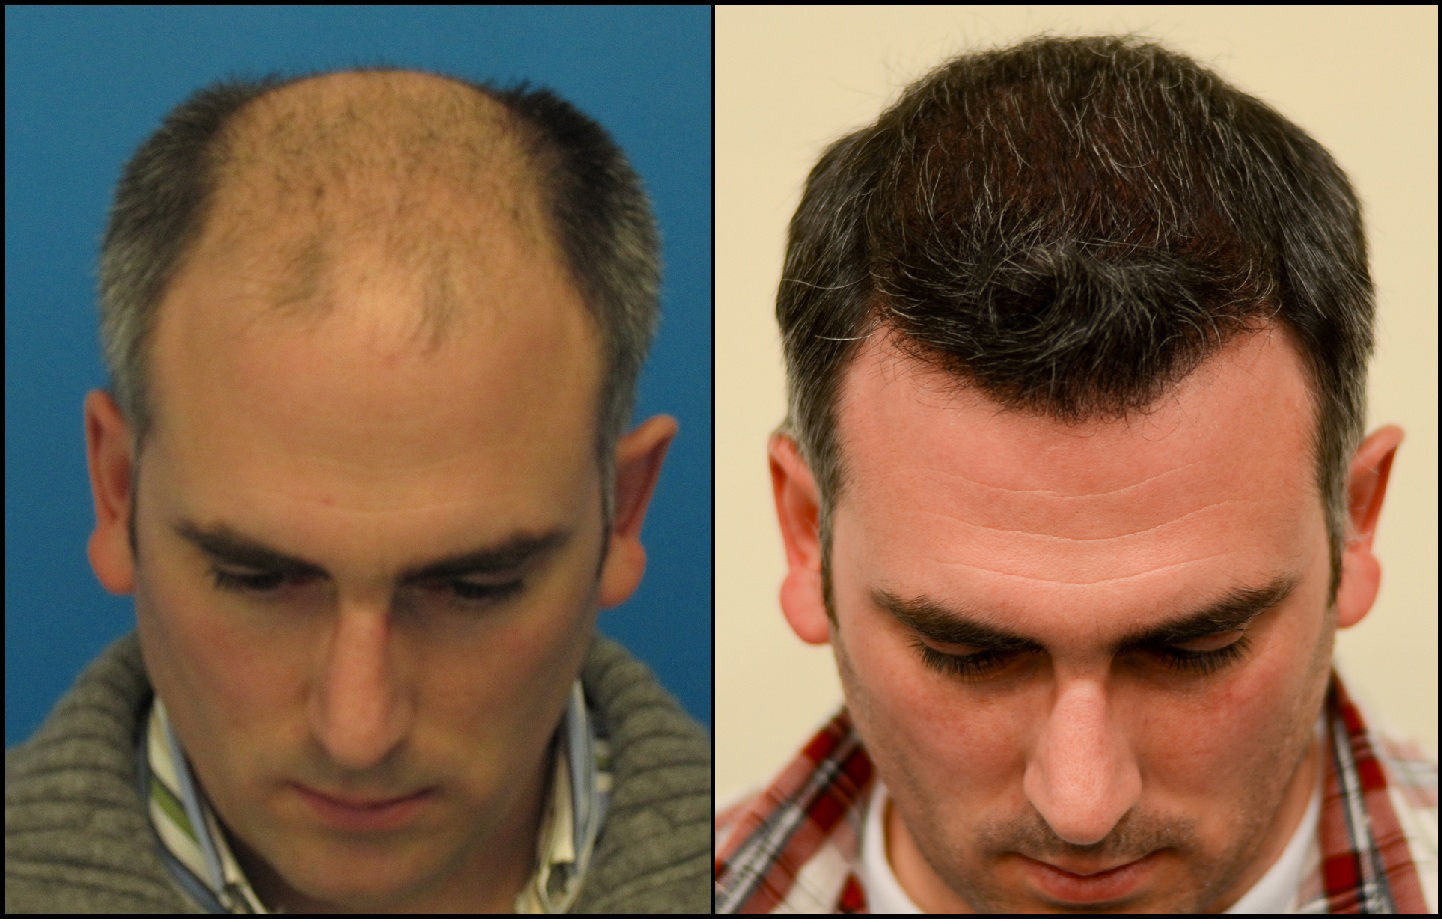 Dr. Hasson/8402 Grafts/One Session/ 11 Months - Results Posted by Leading  Hair Restoration Clinics - Hair Restoration Network - Community For and By  Hair Loss Patients